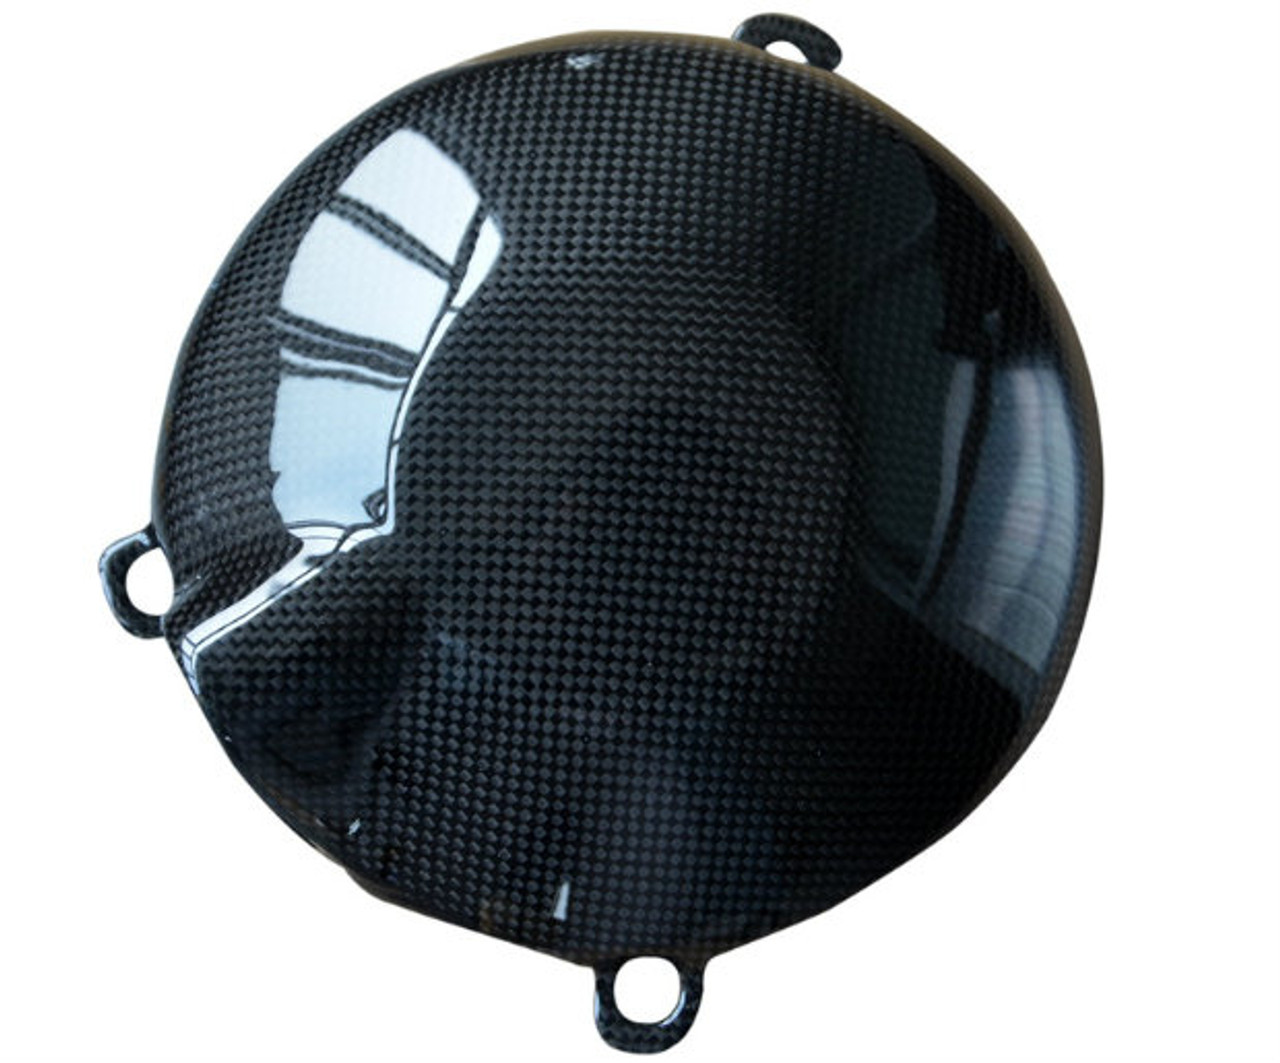 Clutch Cover Cover In 100 Carbon Fiber For Mv Agusta Rivale 800 Dragster 800 Brutale 675 800 F3